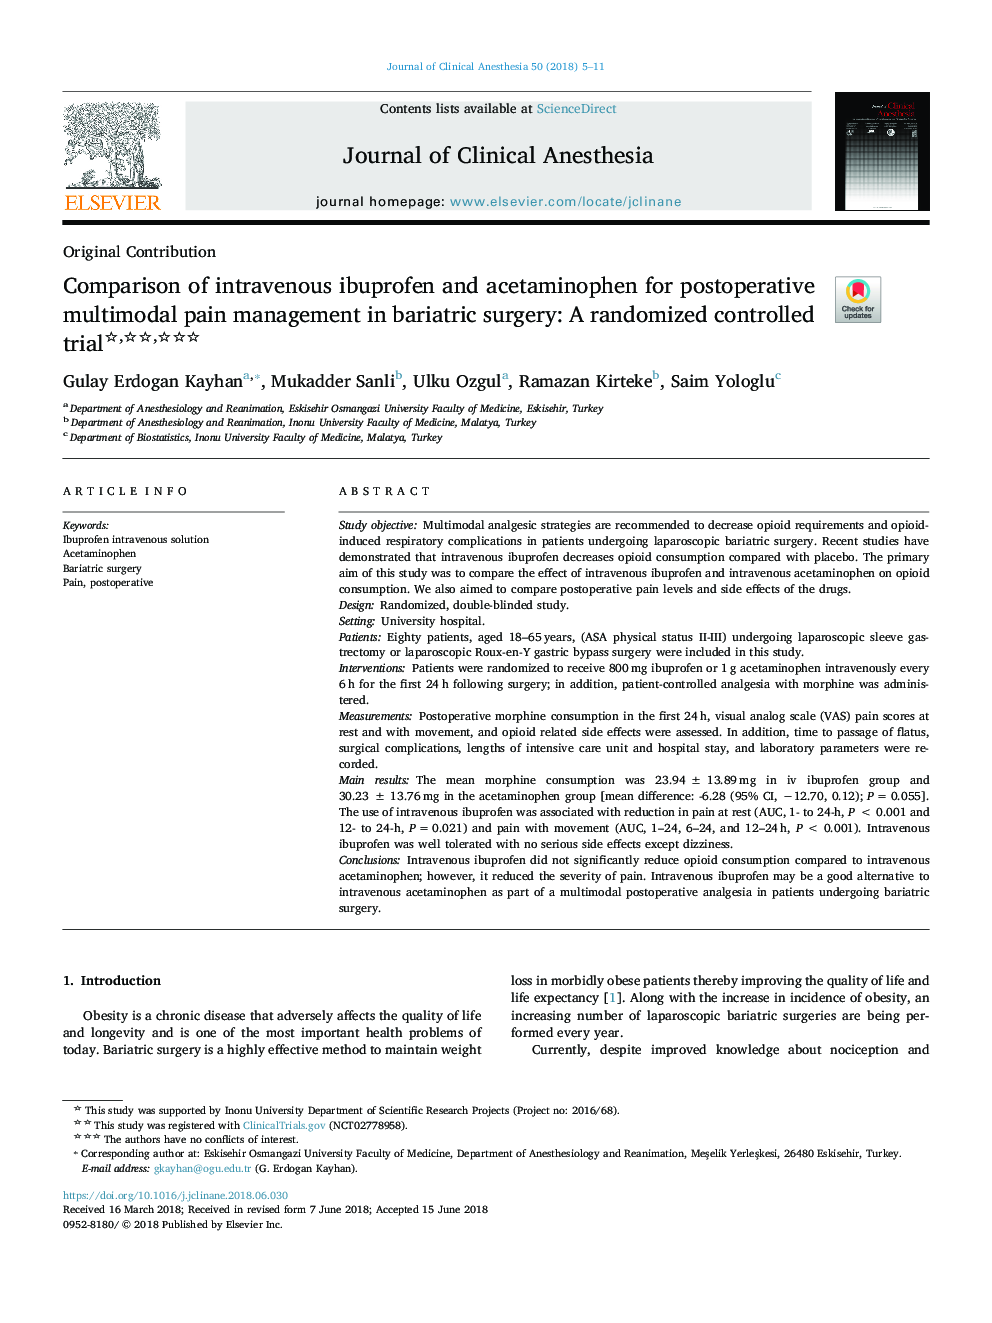 Comparison of intravenous ibuprofen and acetaminophen for postoperative multimodal pain management in bariatric surgery: A randomized controlled trial